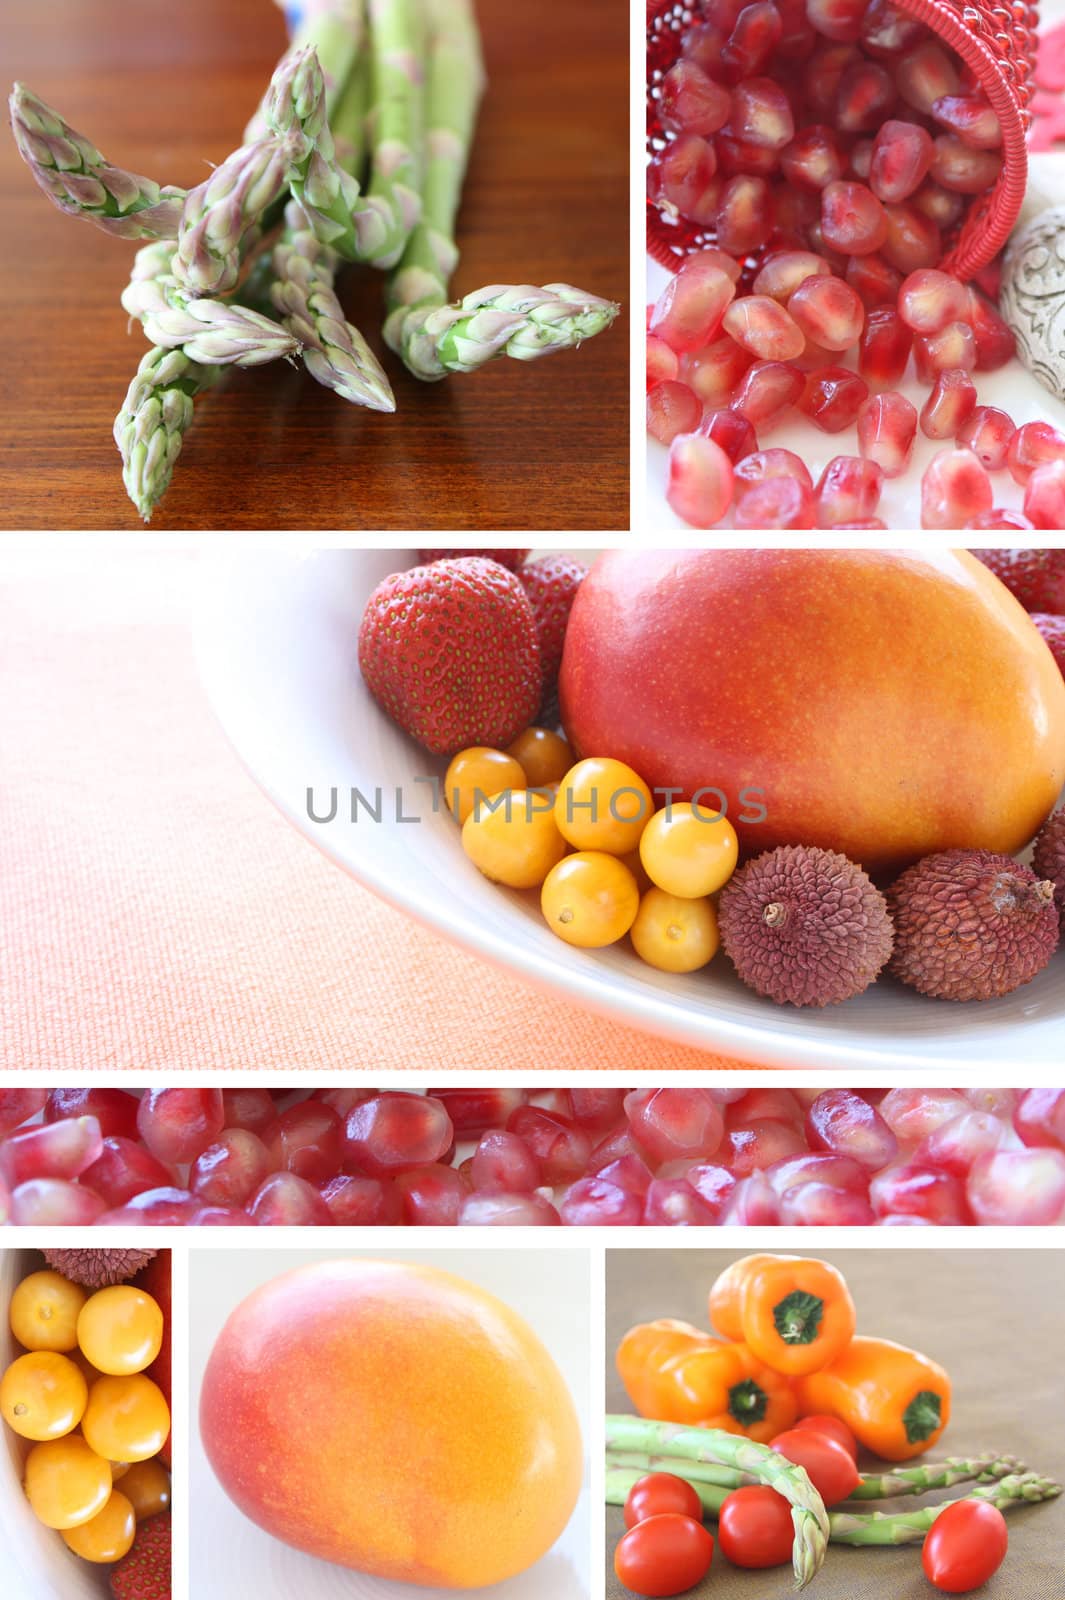 Fruit and Vegetables by liznel